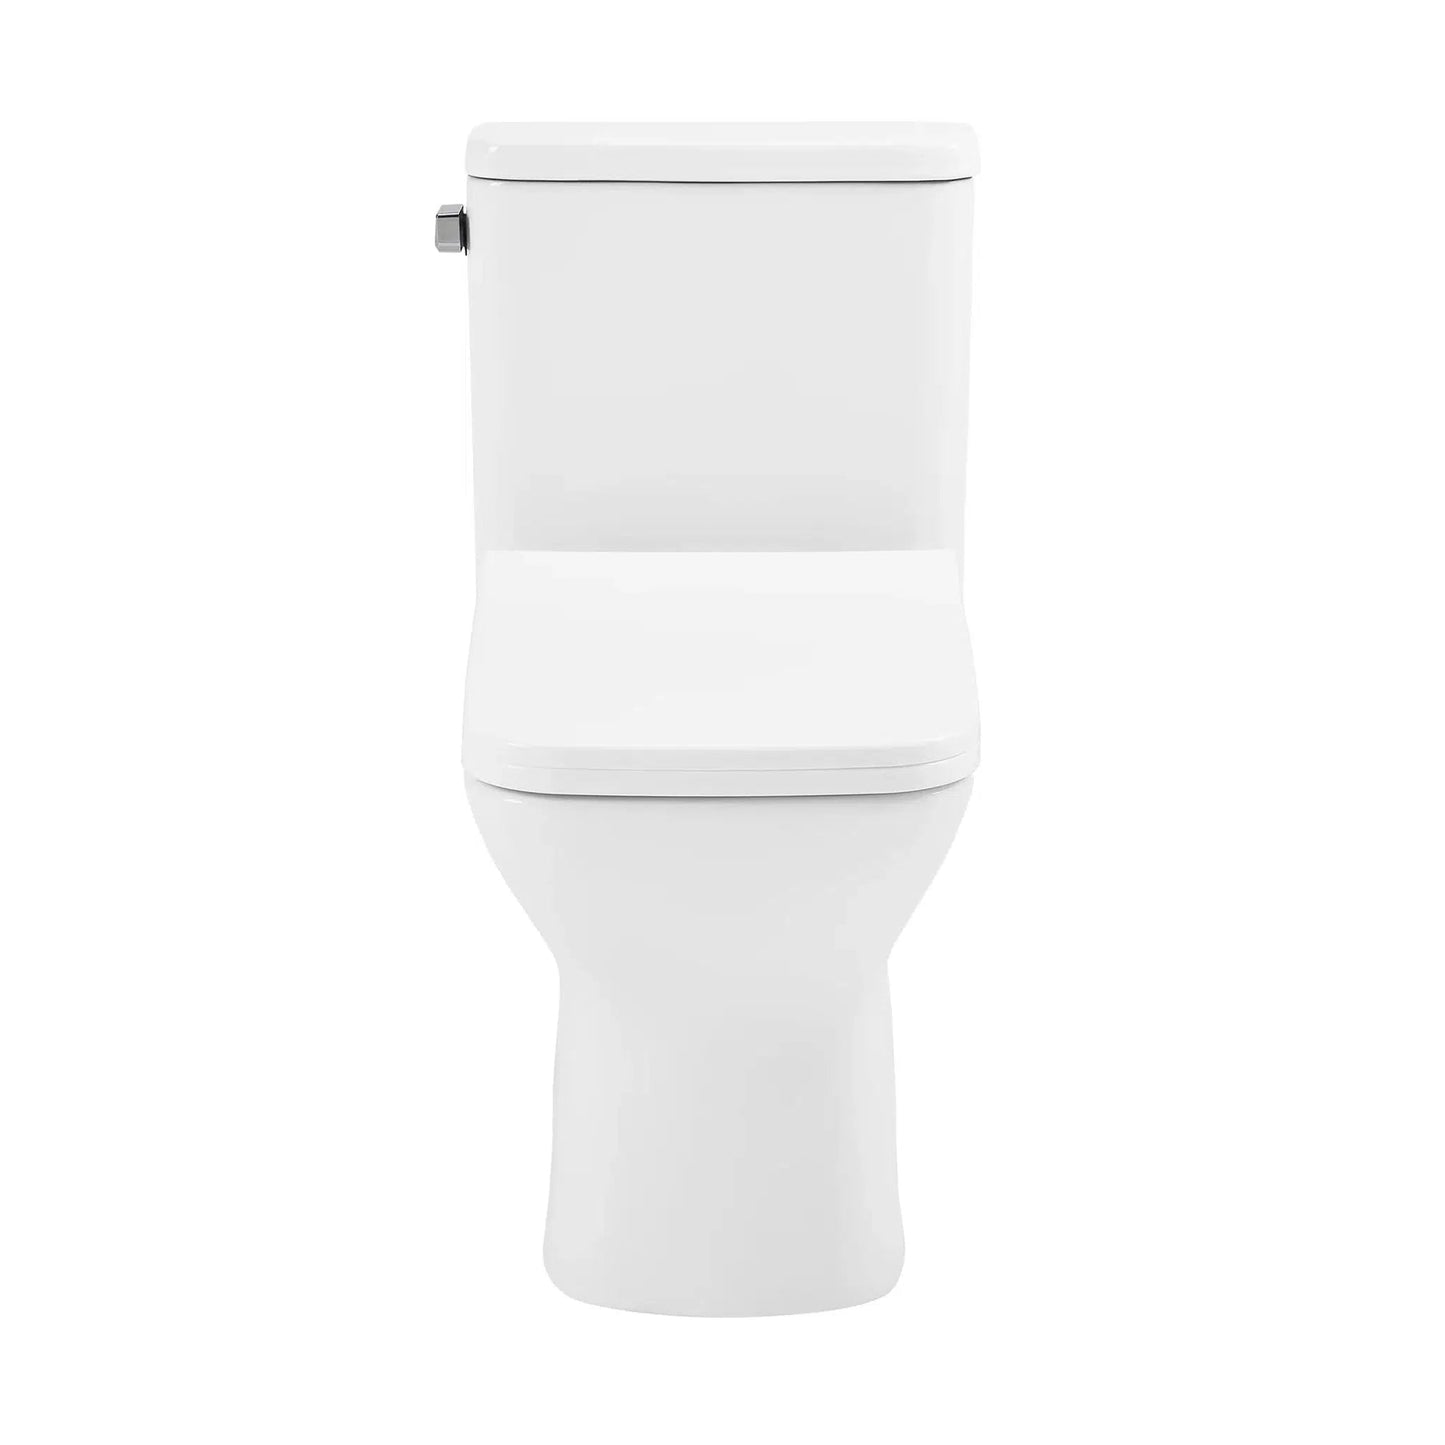 Swiss Madison Carre 15" x 30" One Piece White Elongated Square Floor-Mounted Toilet With 1.27 GPF